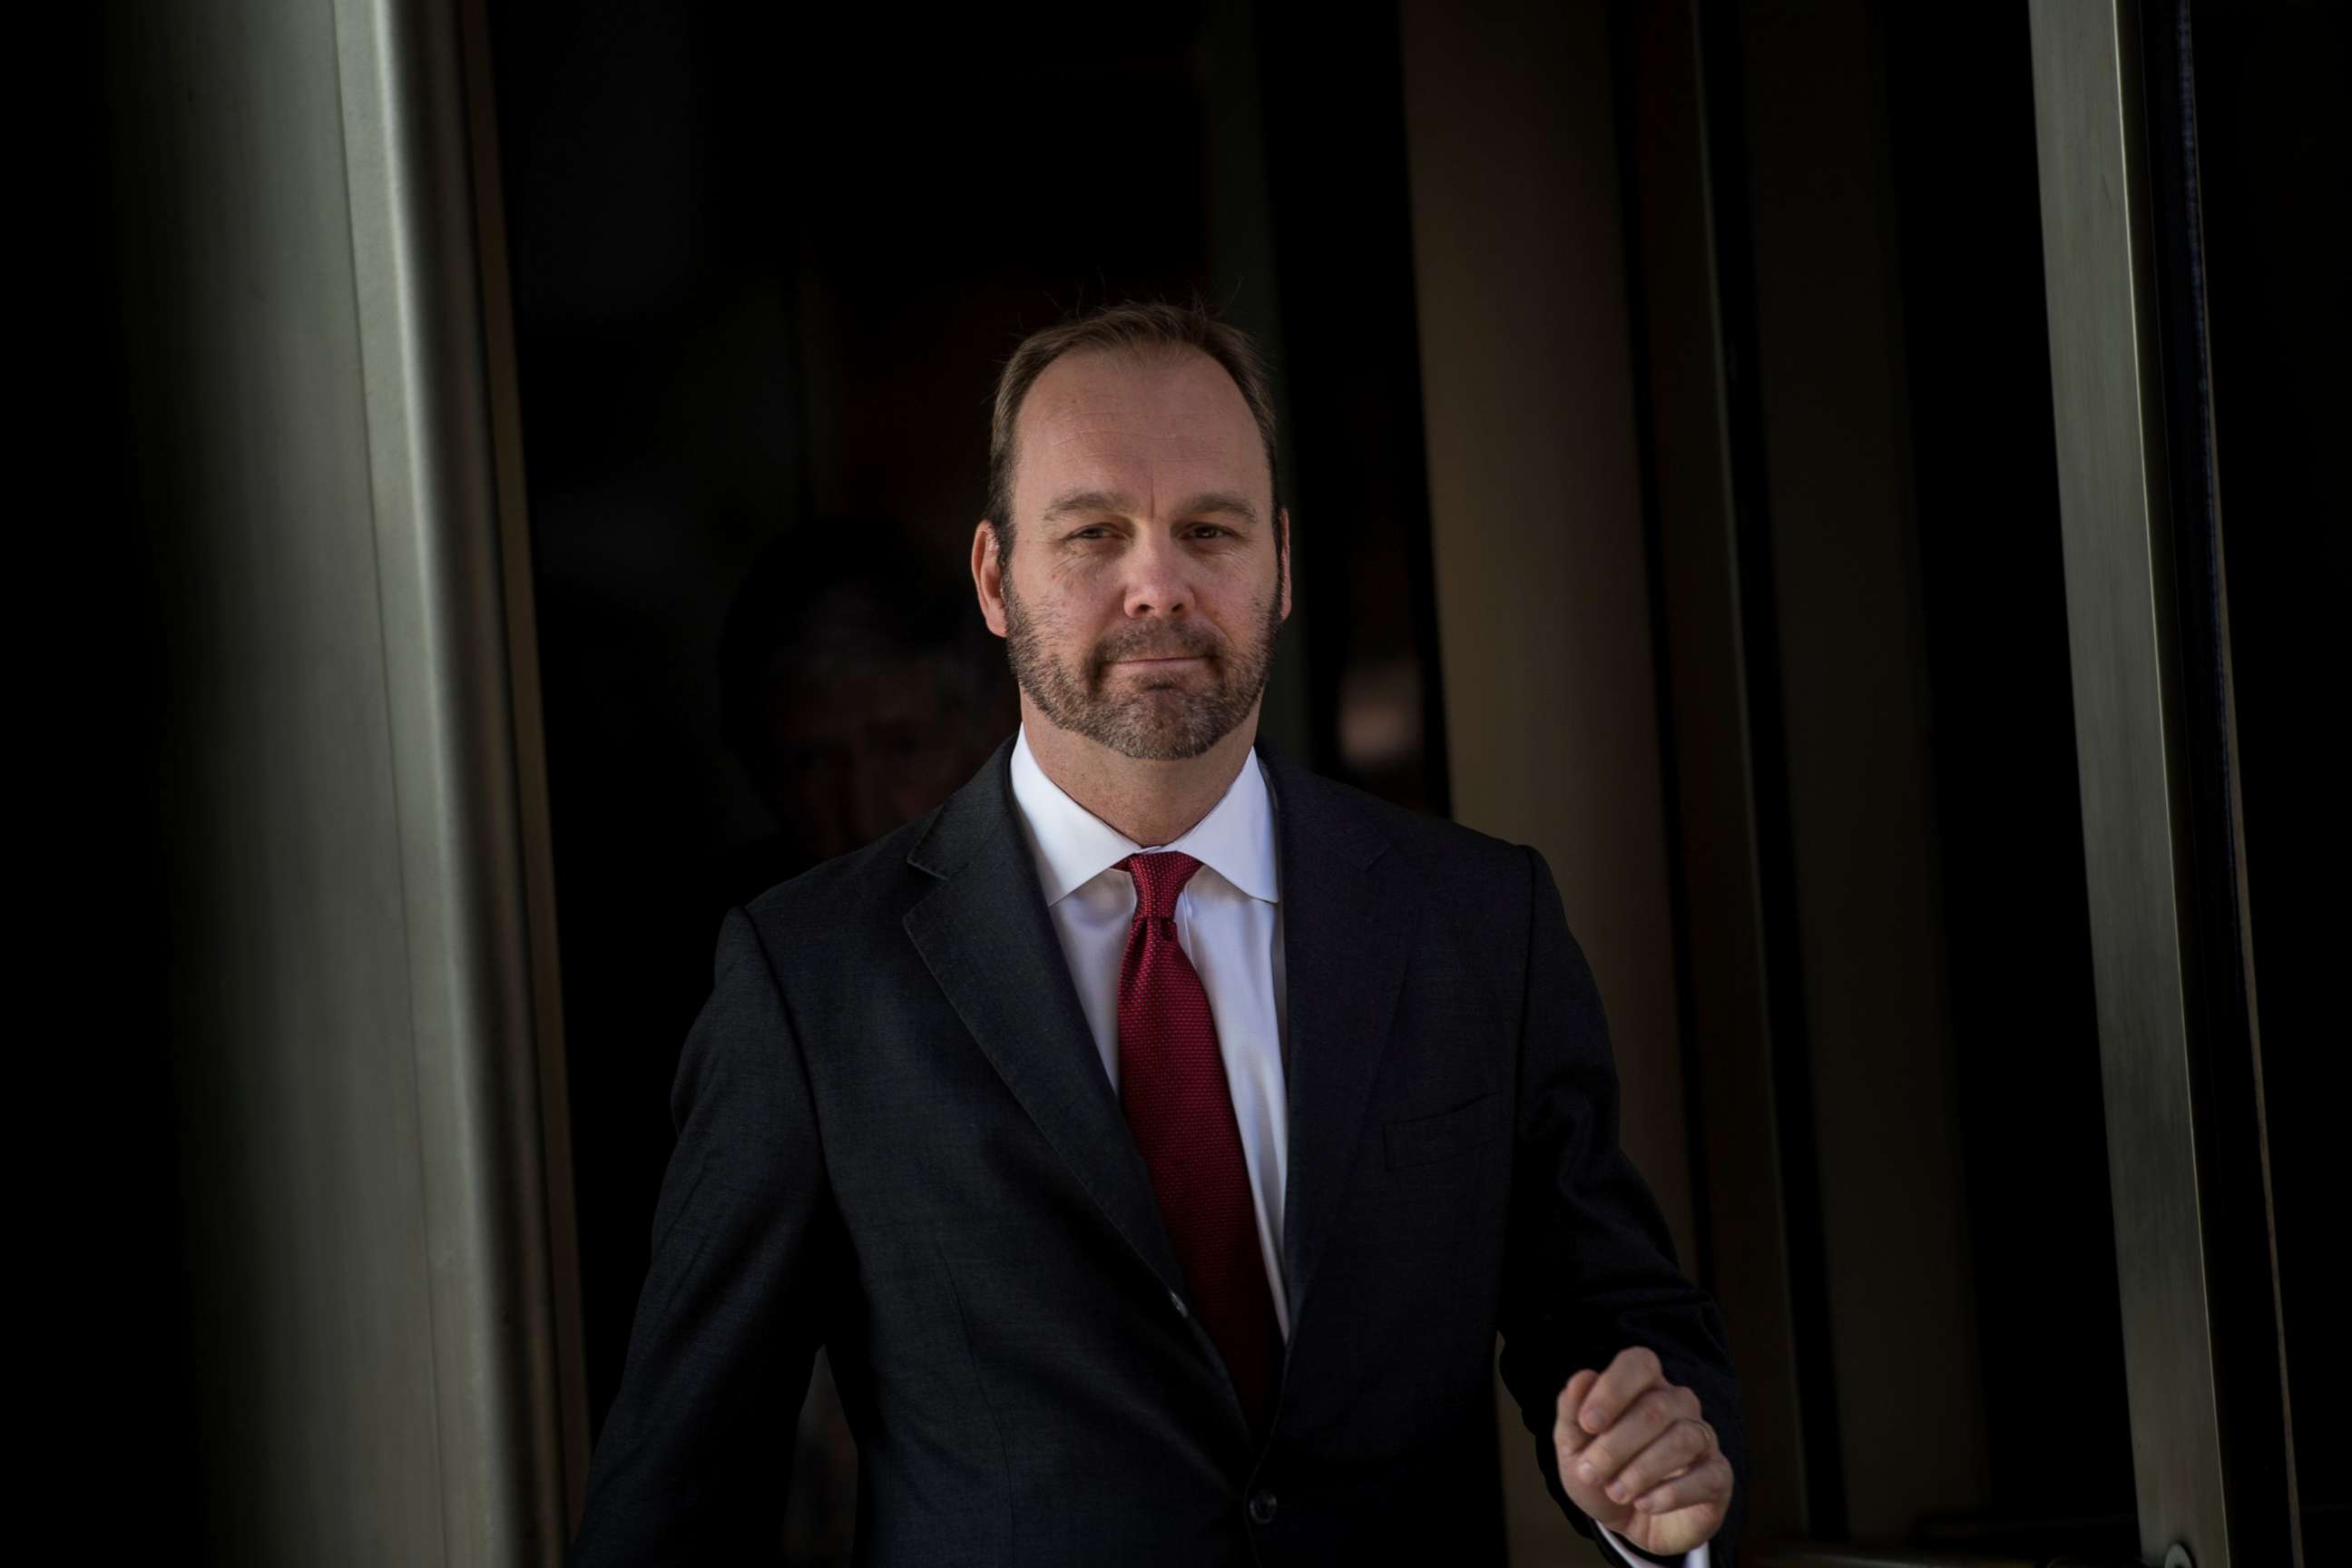 PHOTO: Former Trump campaign official Rick Gates leaves Federal Court, Dec. 11, 2017, in Washington, D.C.
